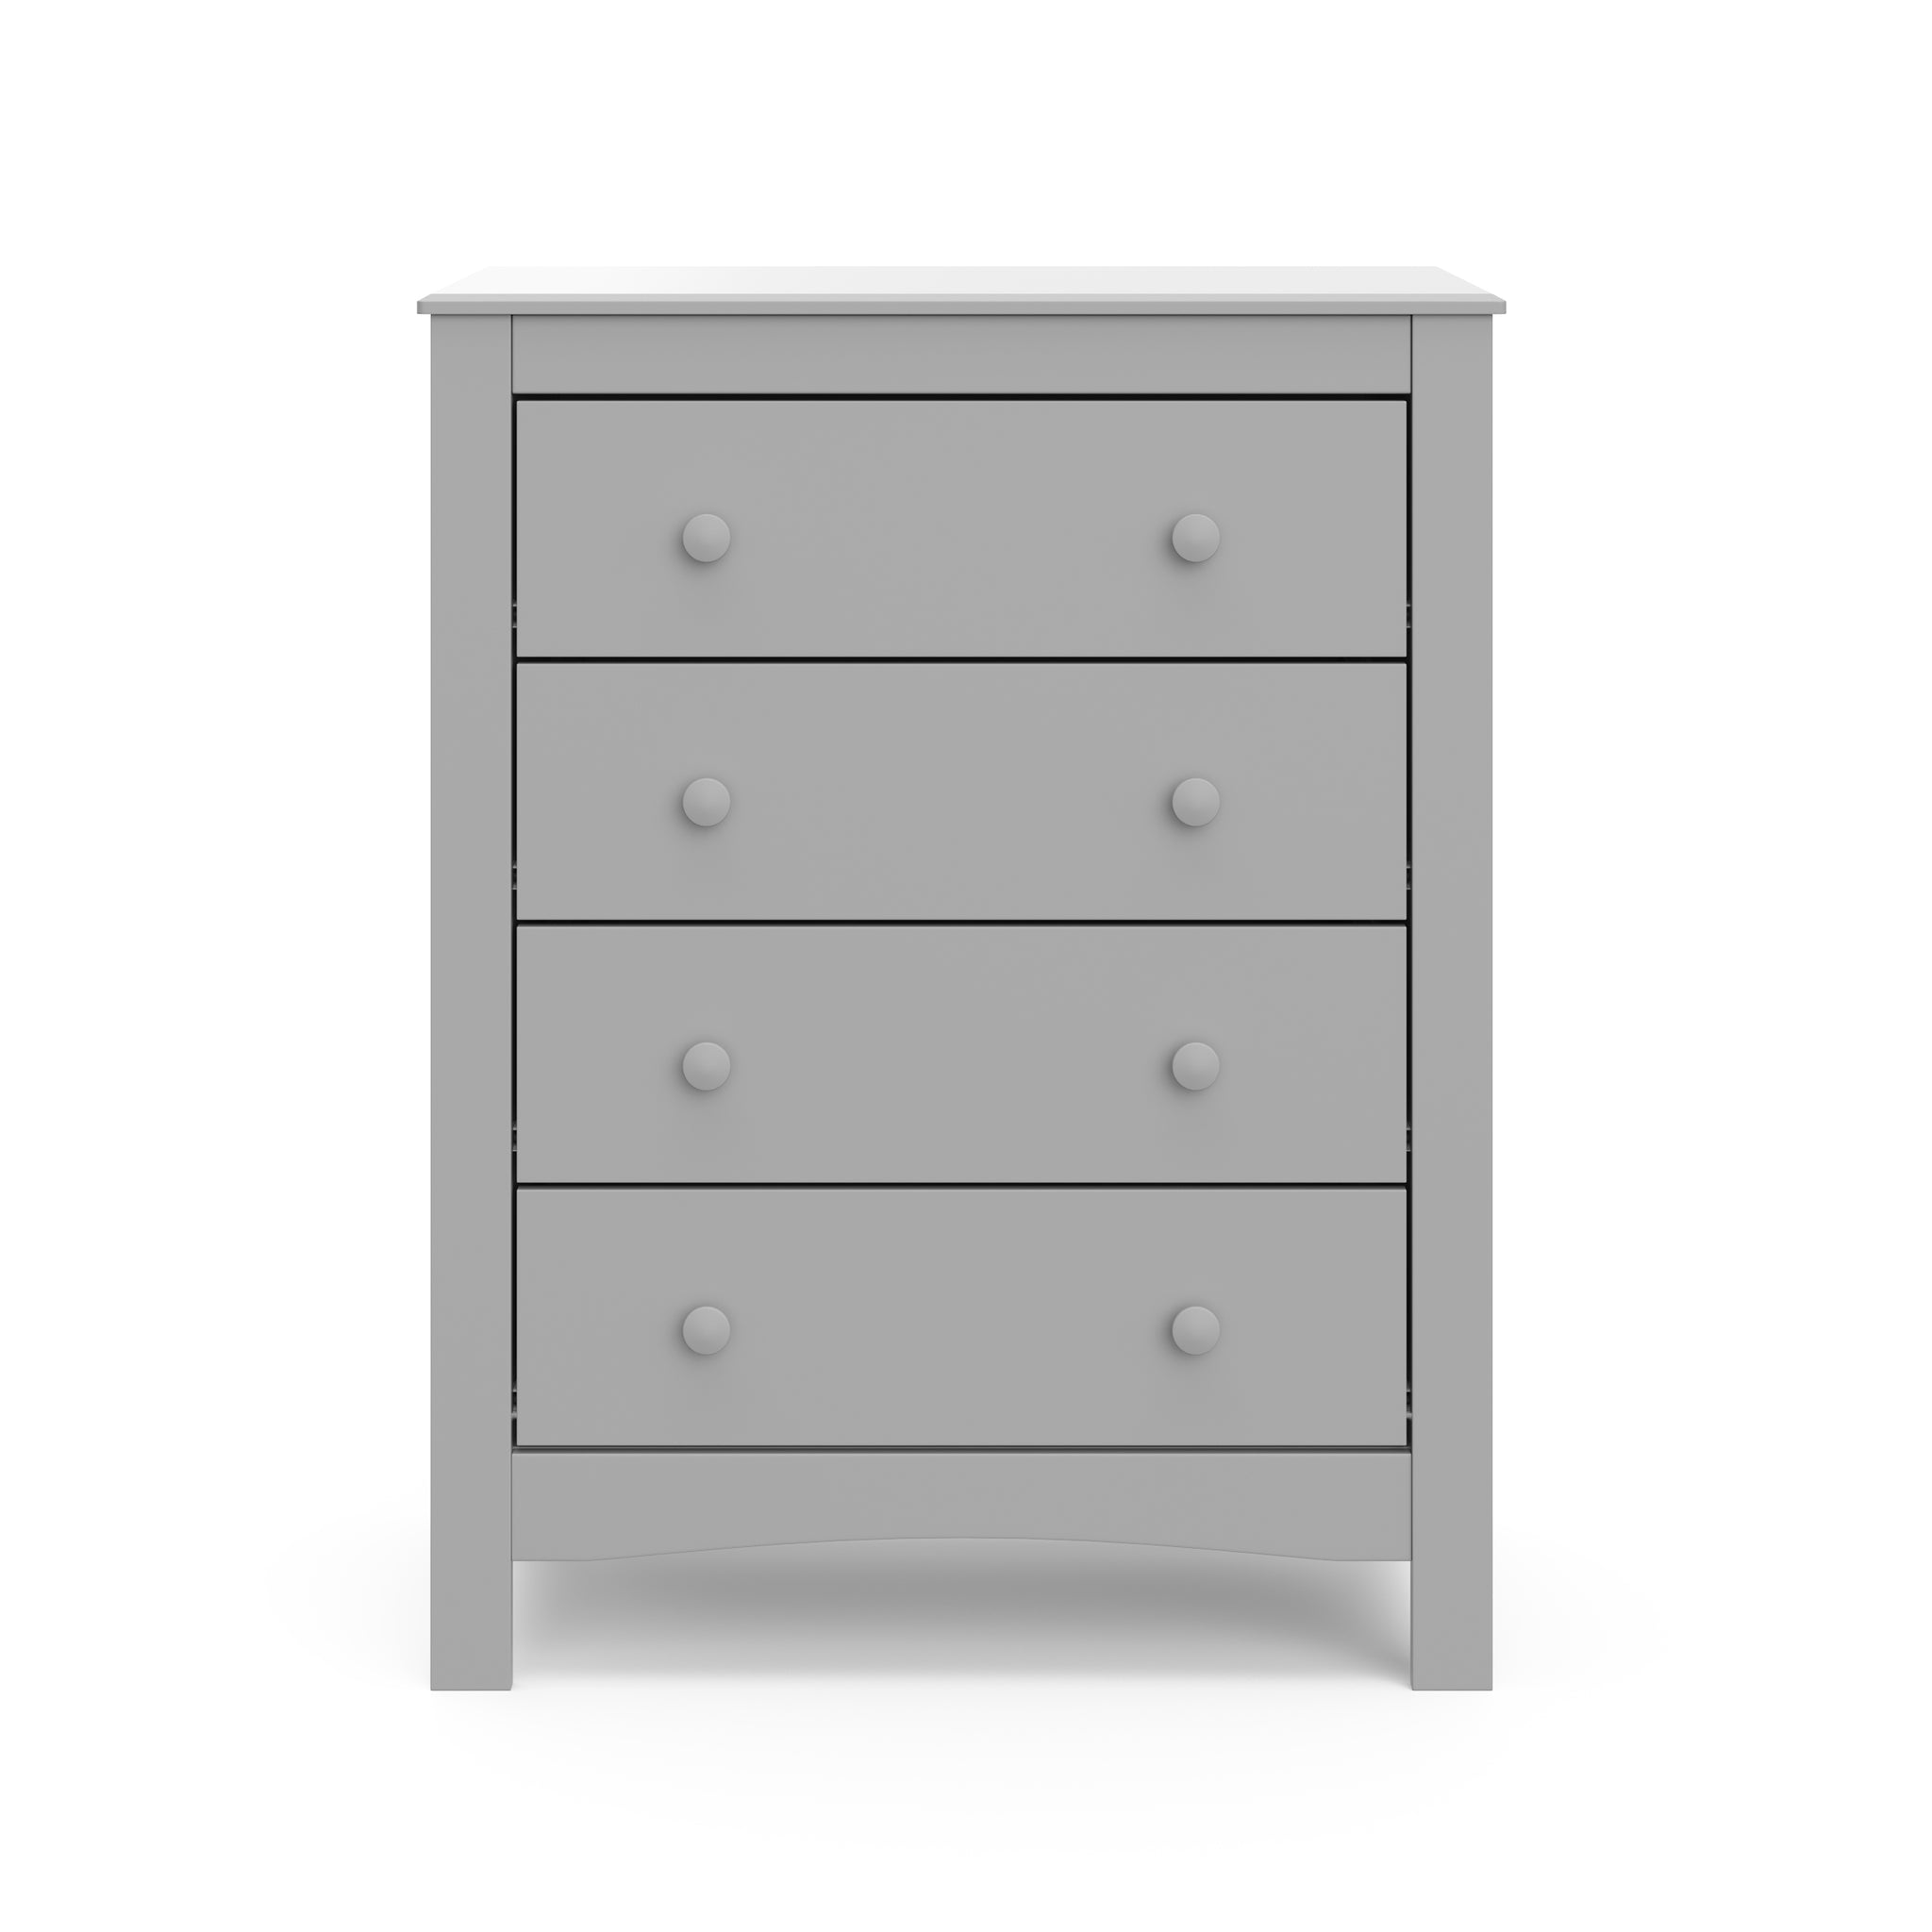 Front view of pebble gray 4 drawer chest